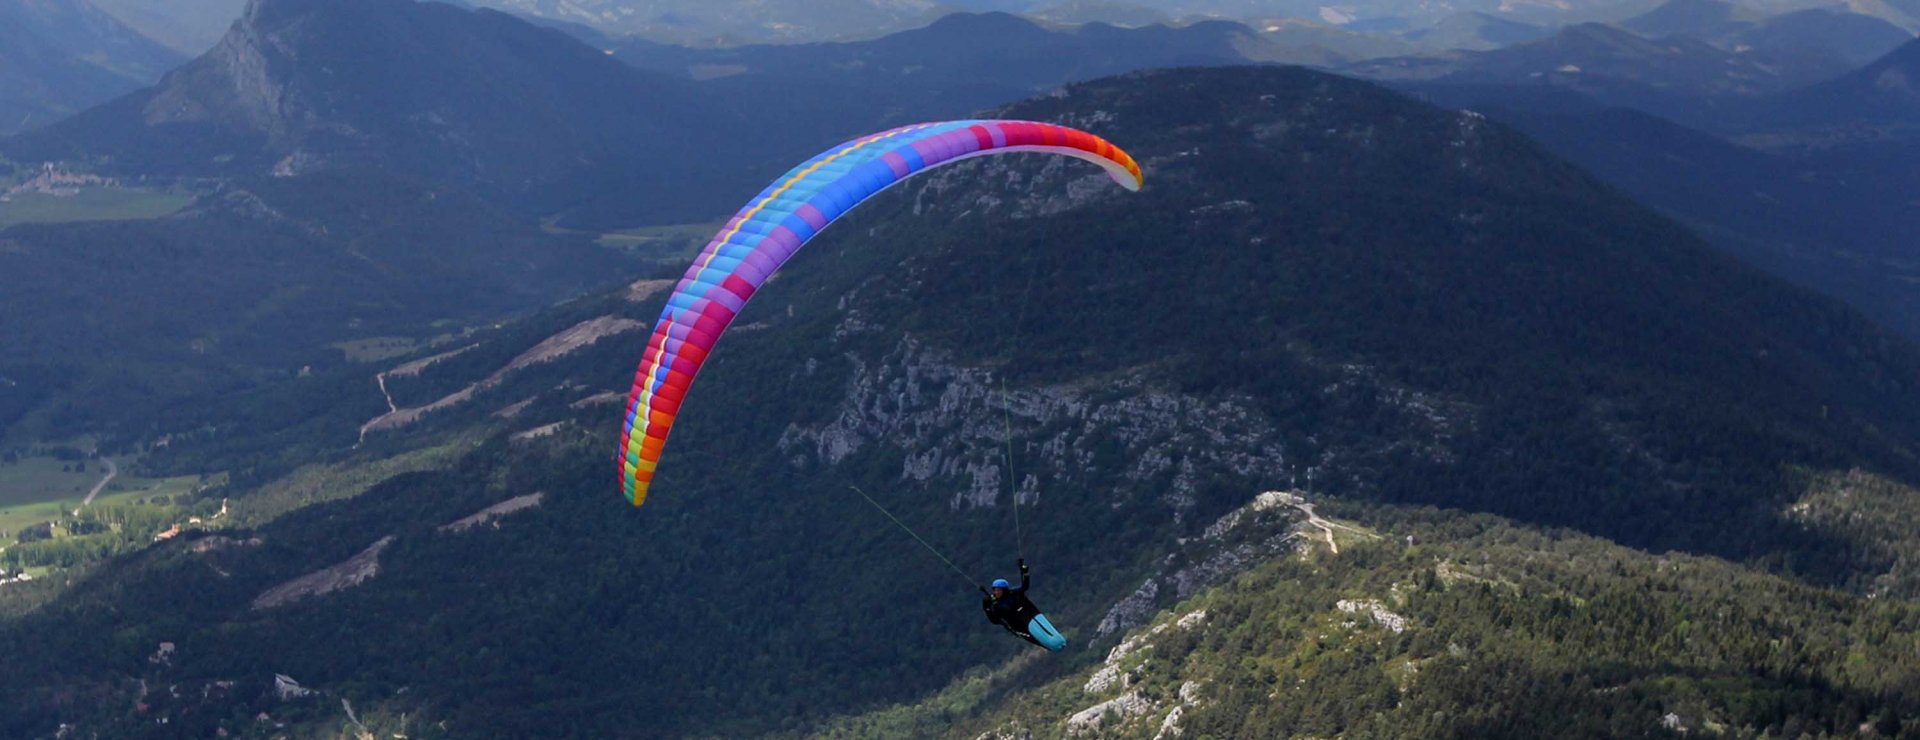 Base 2 |intermediate paraglider | cross country | flybgd.com